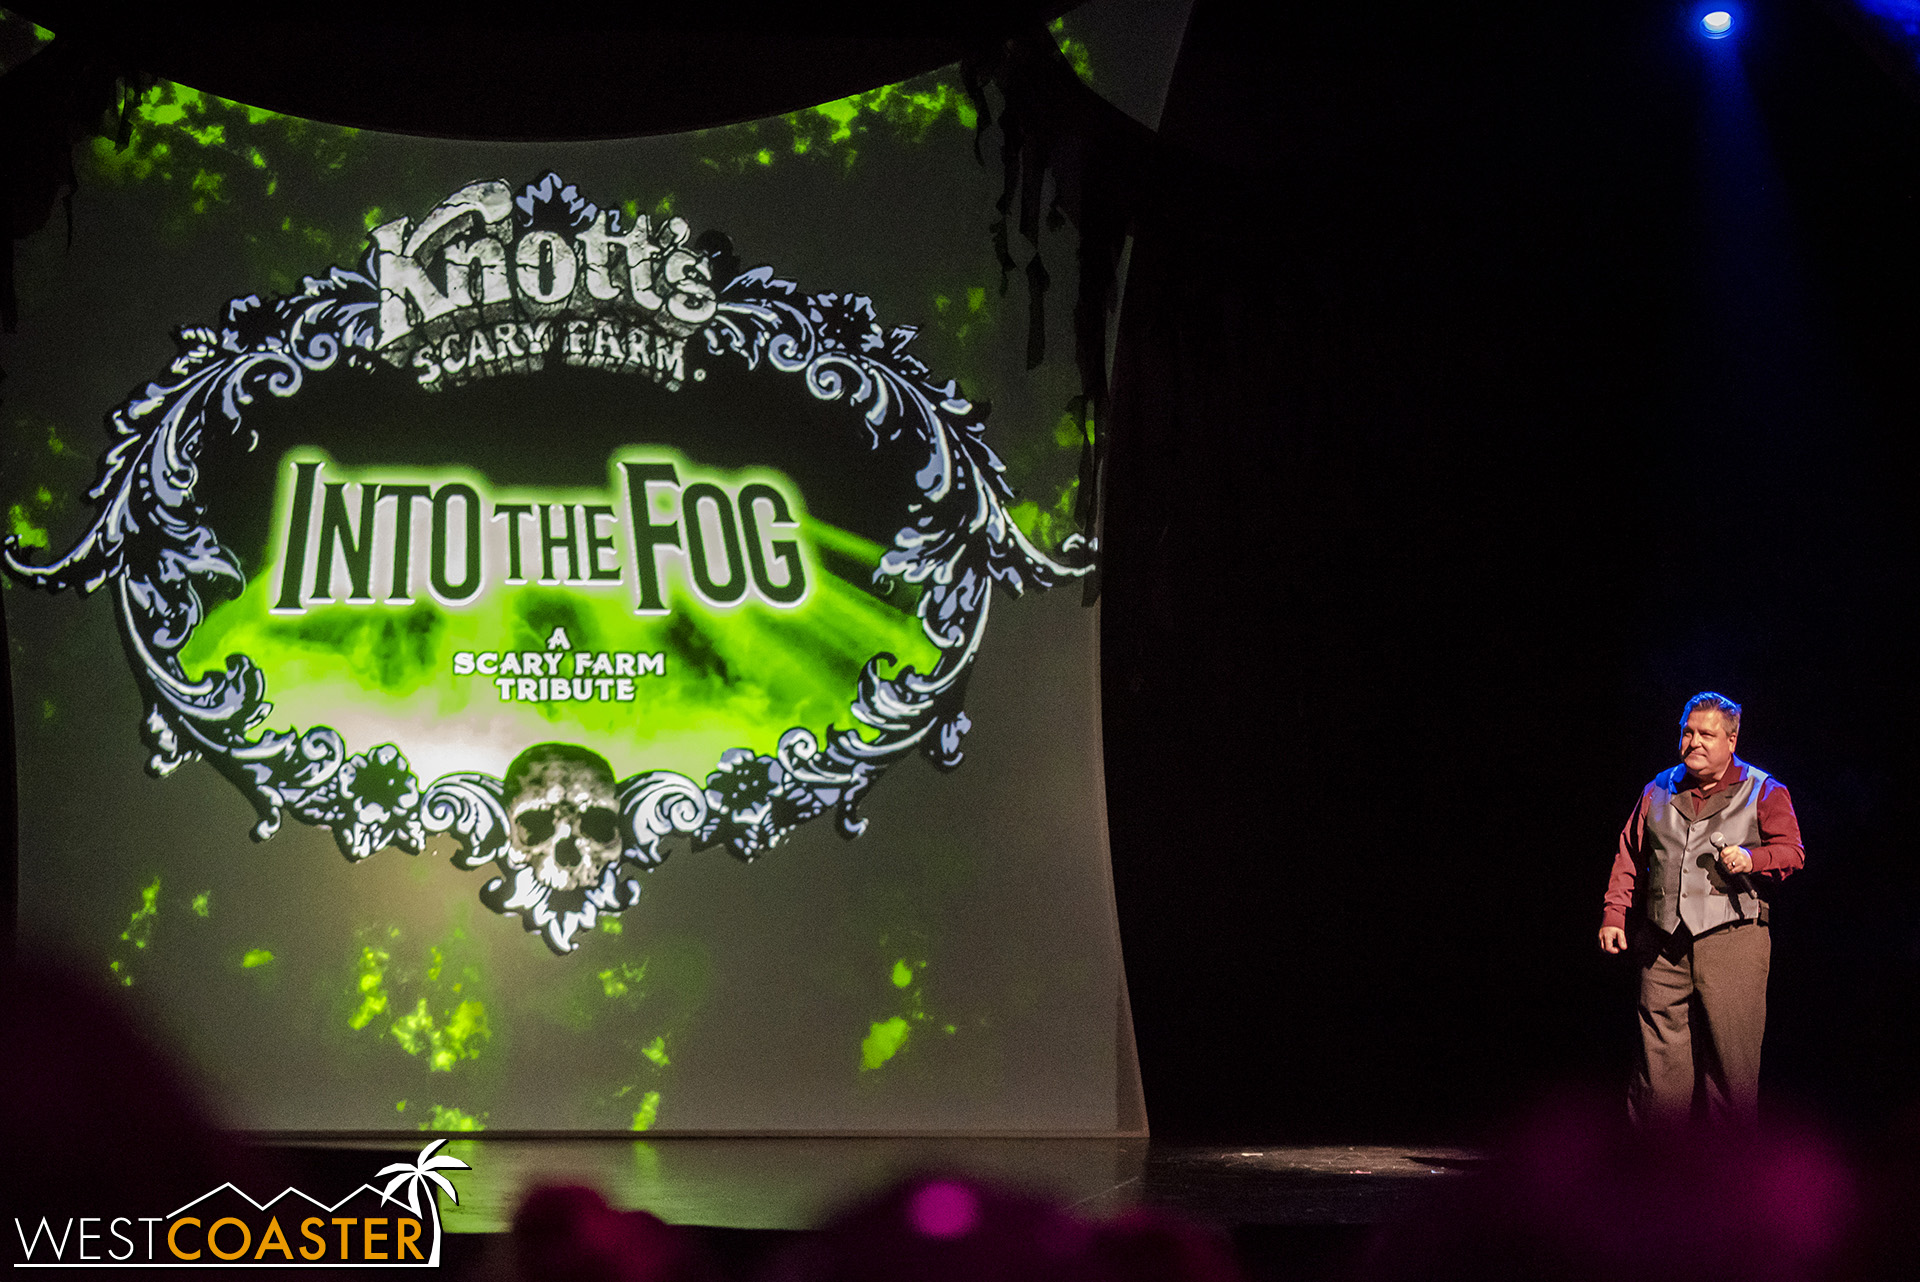  Into the Fog: A Scary Farm Tribute is back for a second year. 